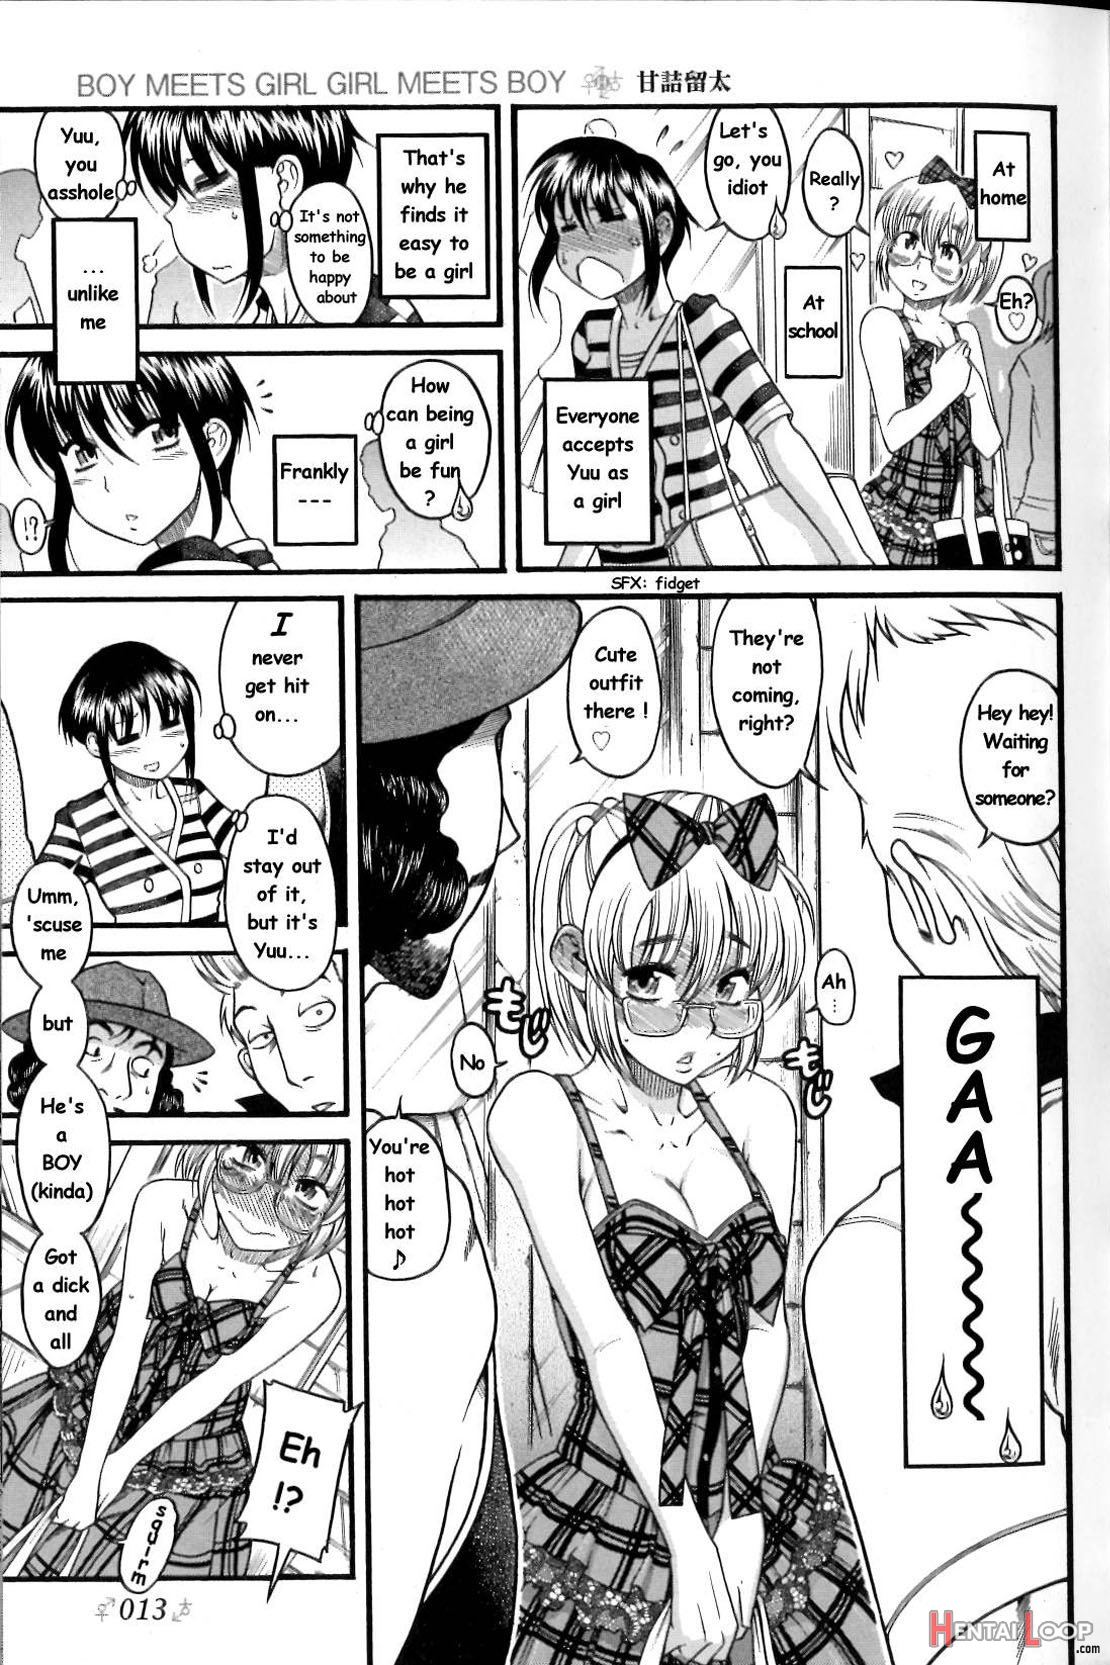 Boy Meets Girl, Girl Meets Boy 2- Single Page Version page 13